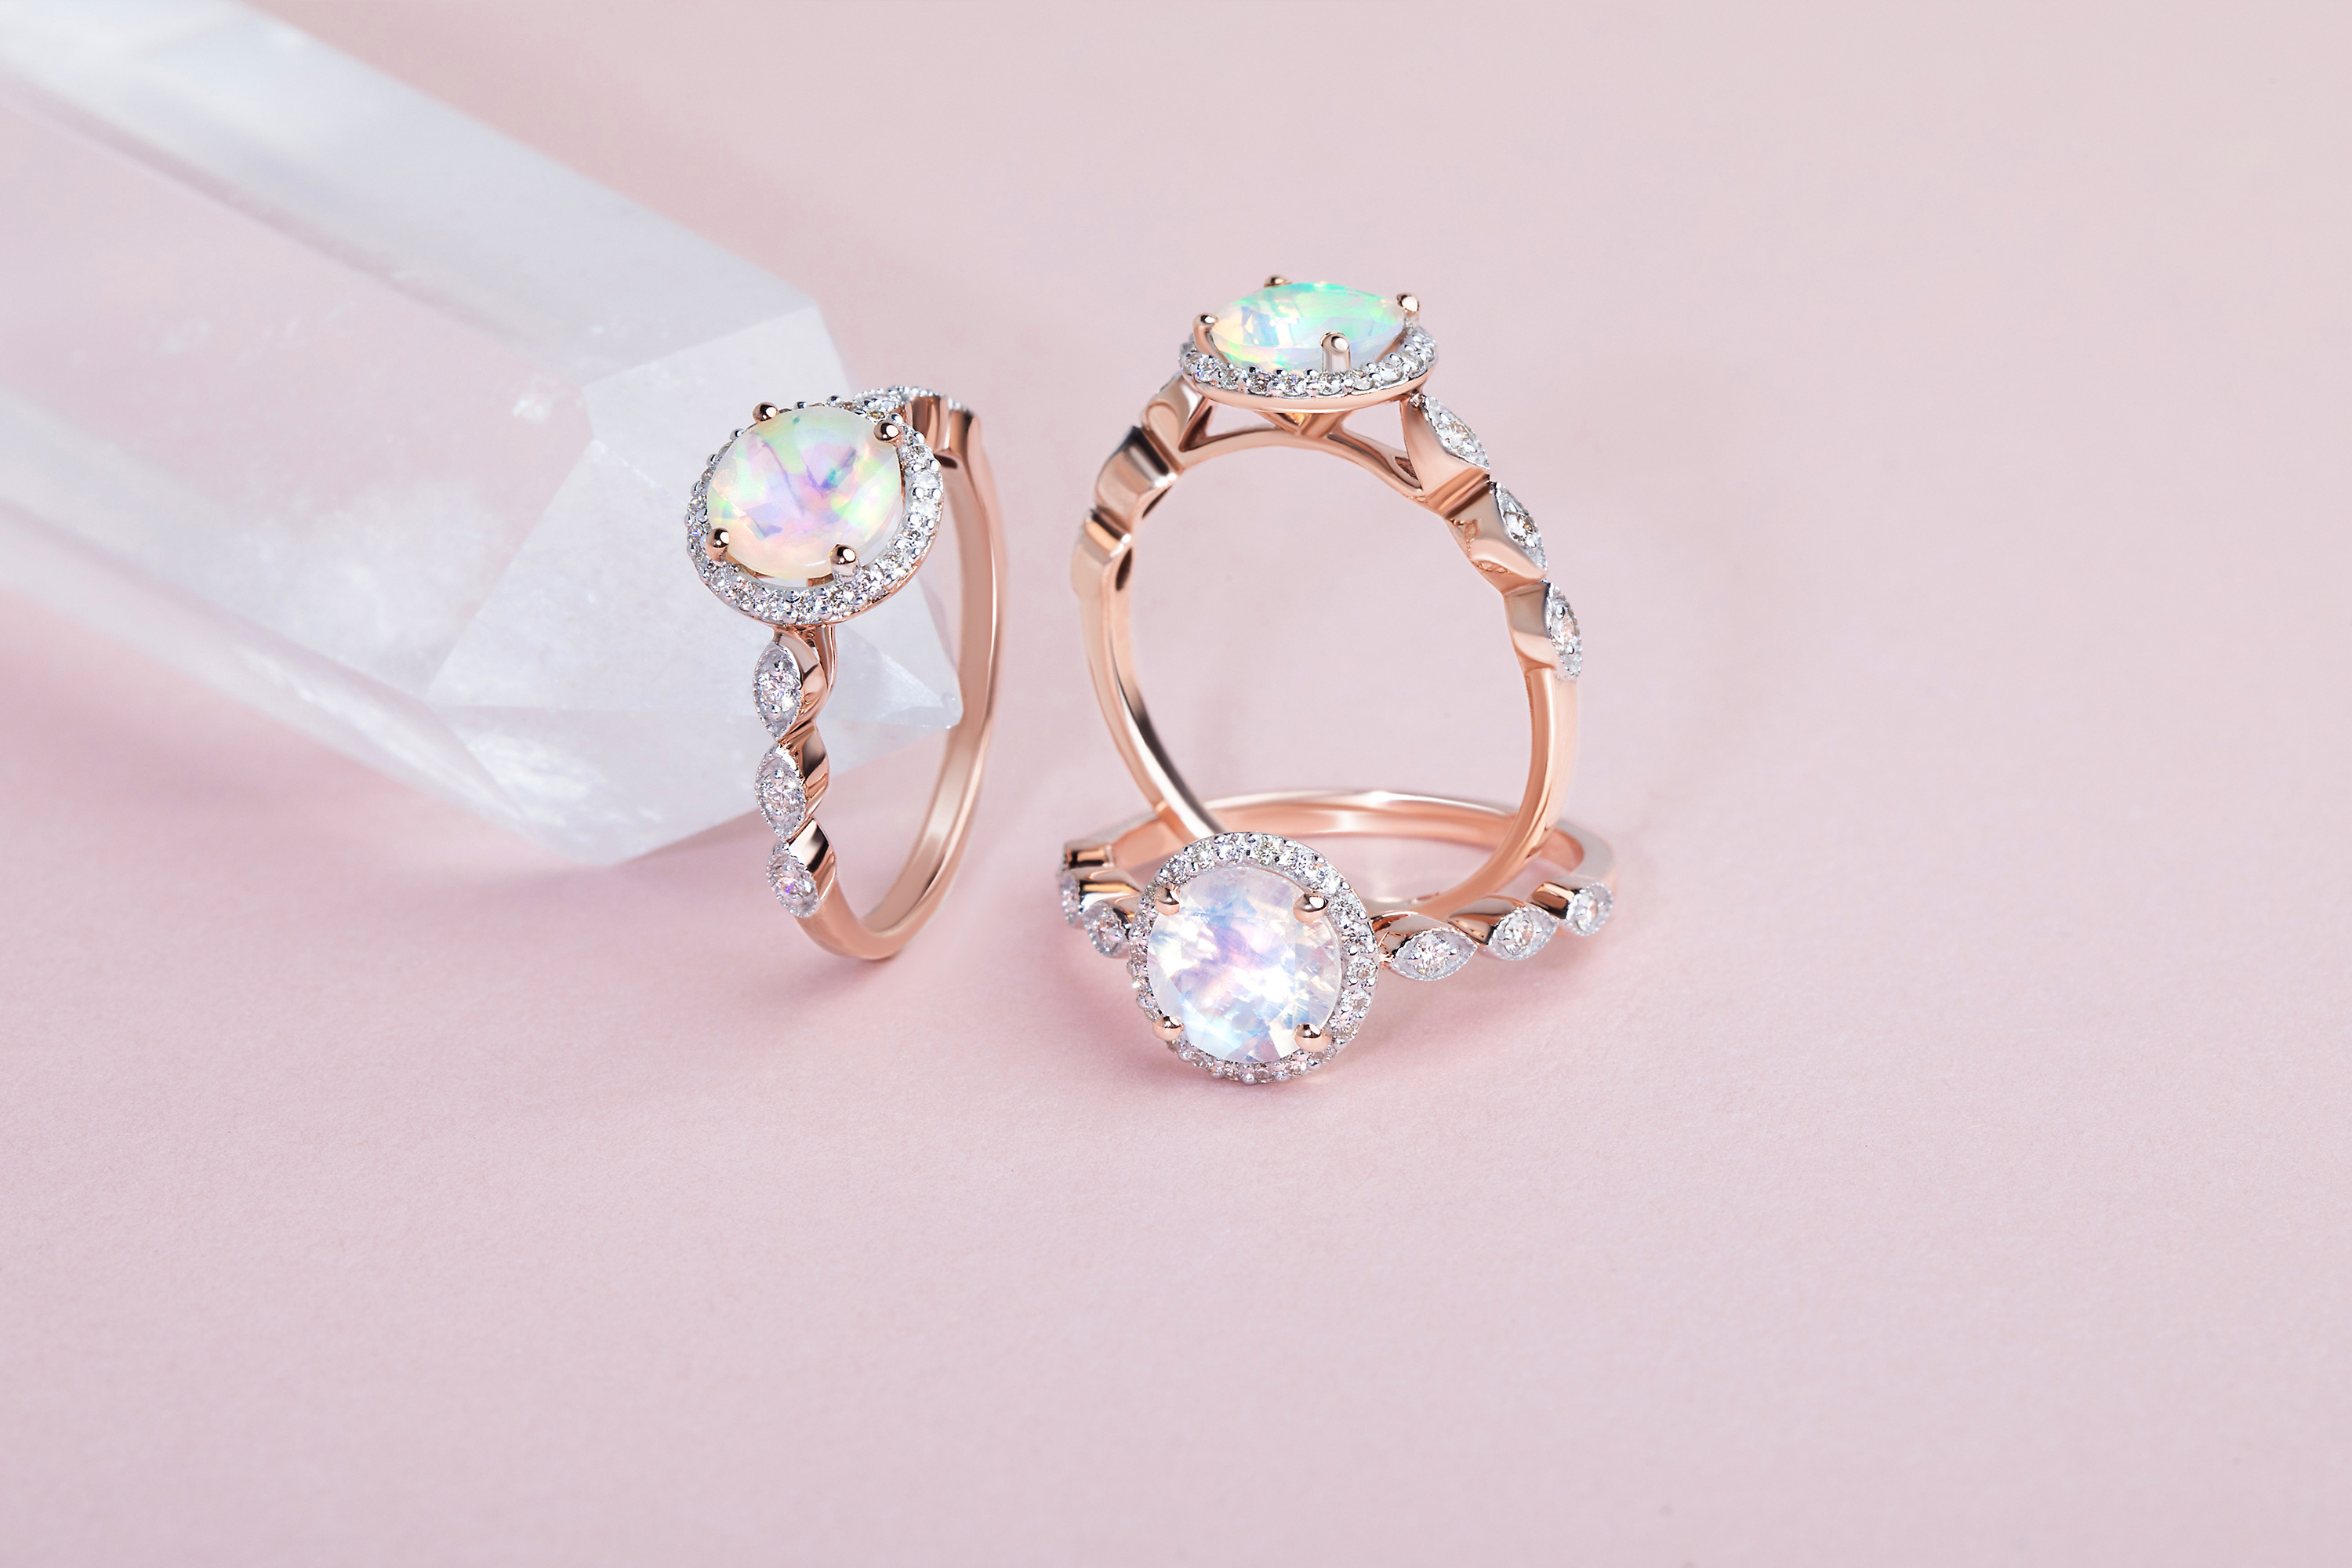 Two Opal Diamond Rings - Soulmate and one Moonstone Diamond Ring - Soulmate are presented next to a raw crystal.